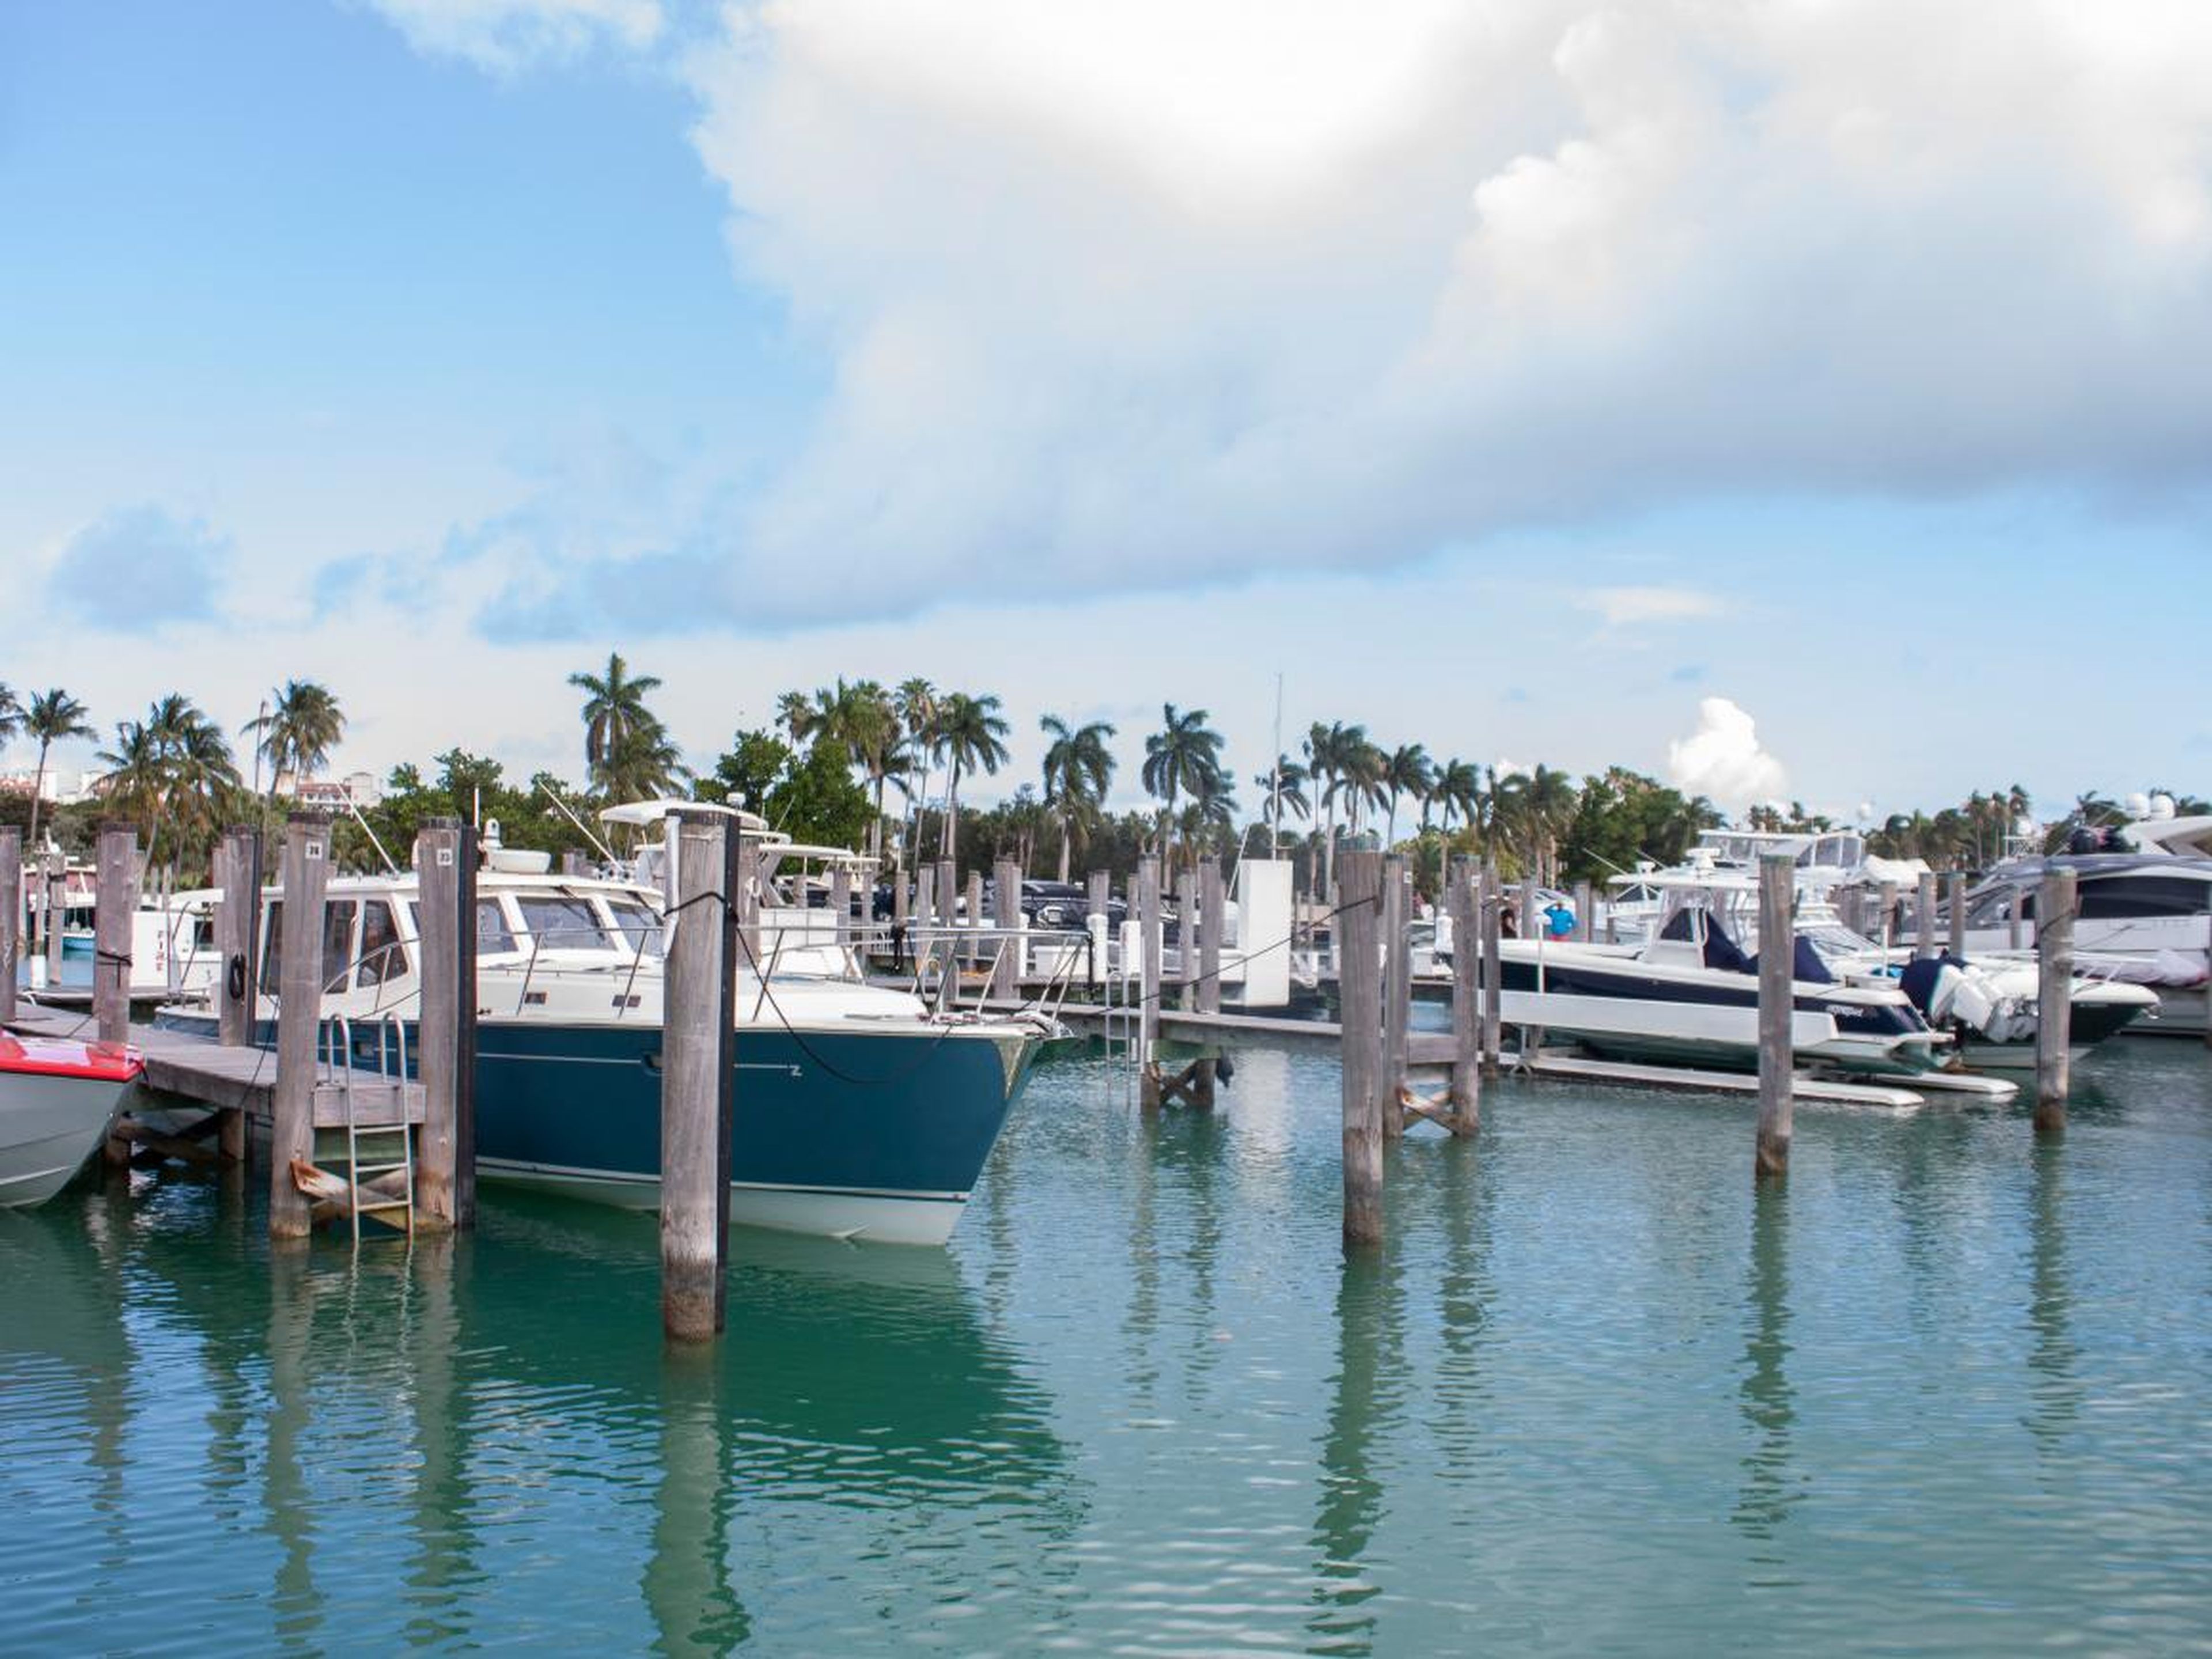 The island has two deep-water marinas that can accommodate luxury yachts up to 250 feet.